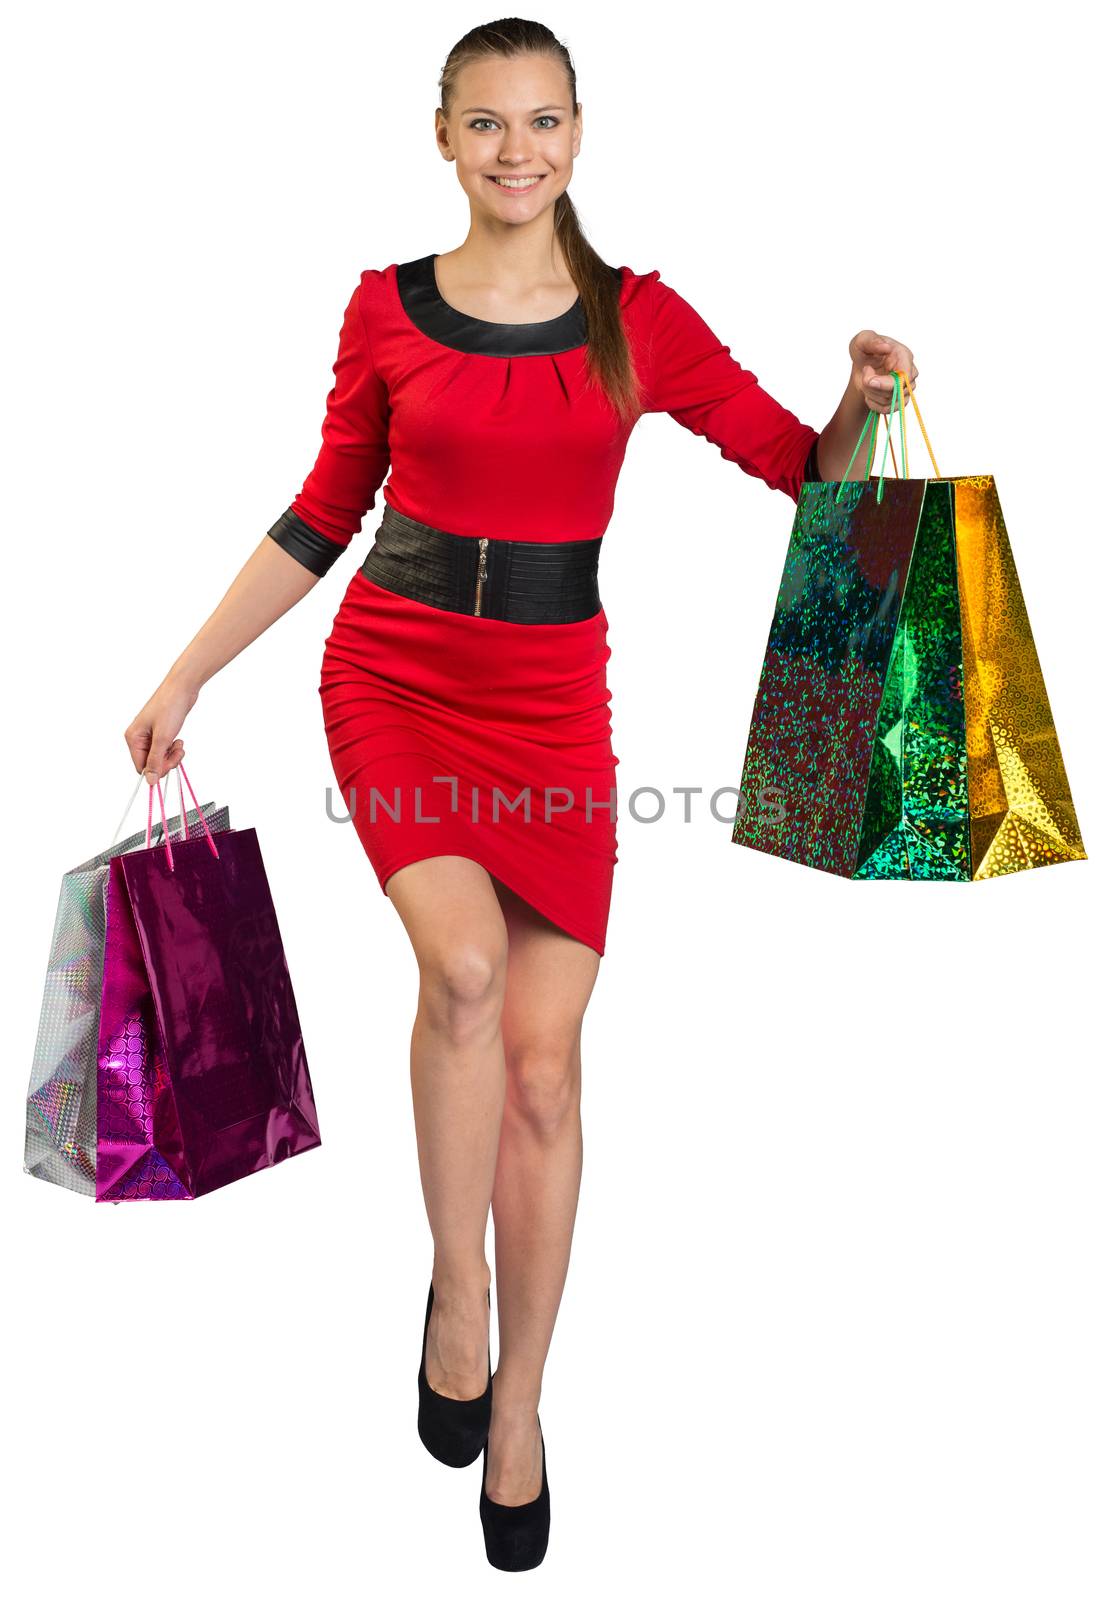 Walking young woman with teeth smile and right leg forward, handing four colorful shopping bags up and looking at camera. Isolated background